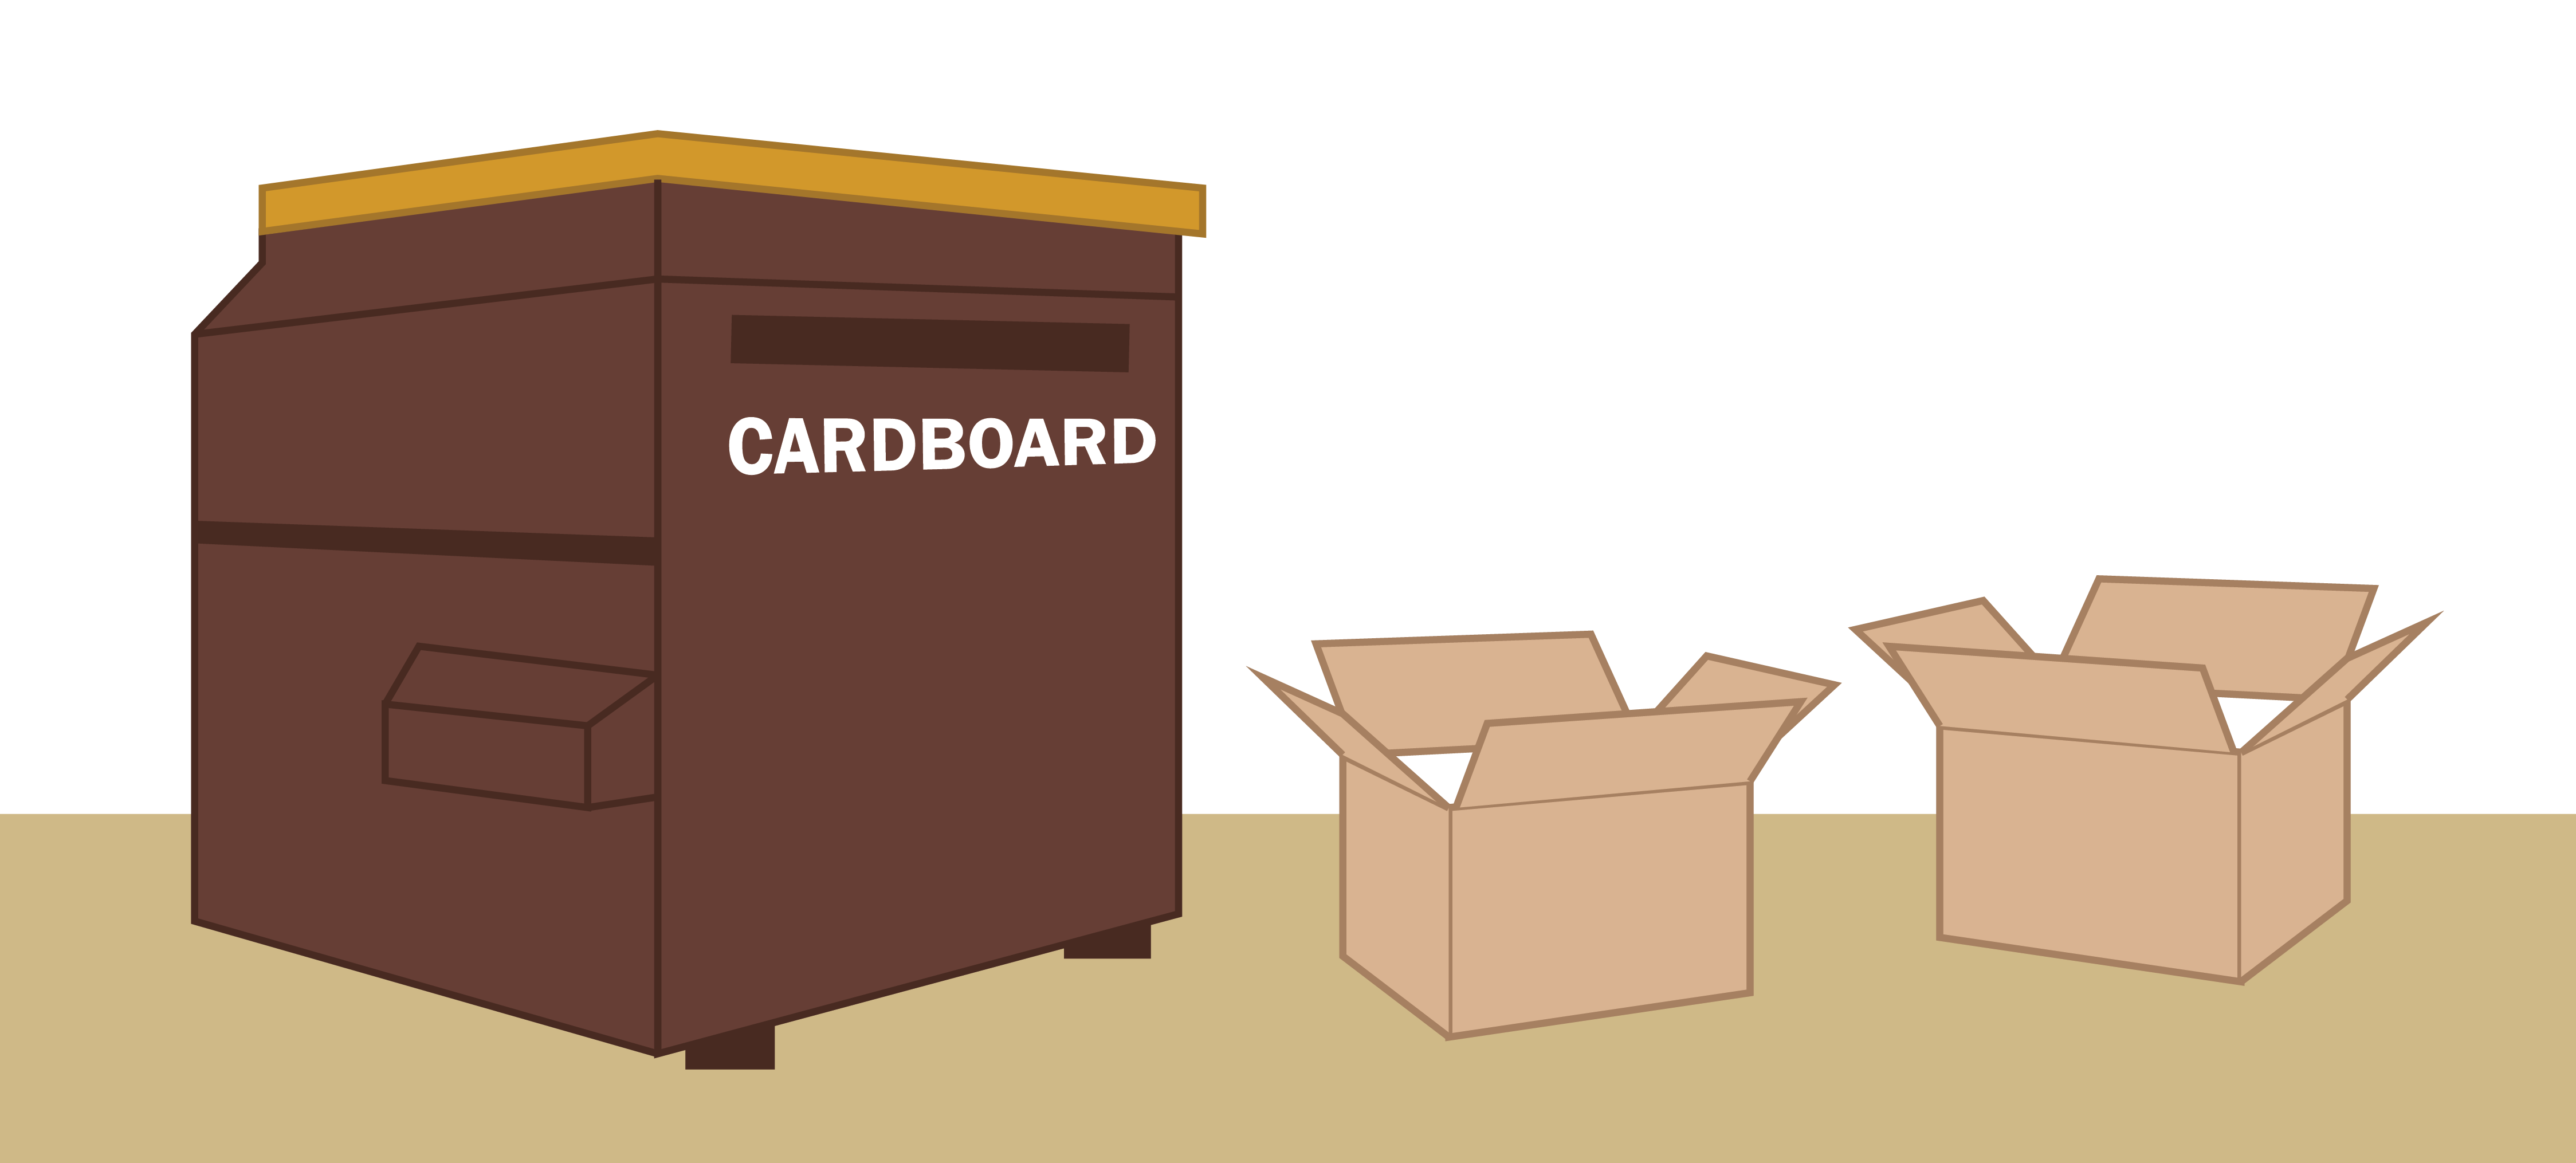 On the left side of the image is a large blue dumpster, there is a narrow slit on the right side, and underneath it reads ‘CARDBOARD’ in white text, next to that near the center of the image are two open cardboard boxes.